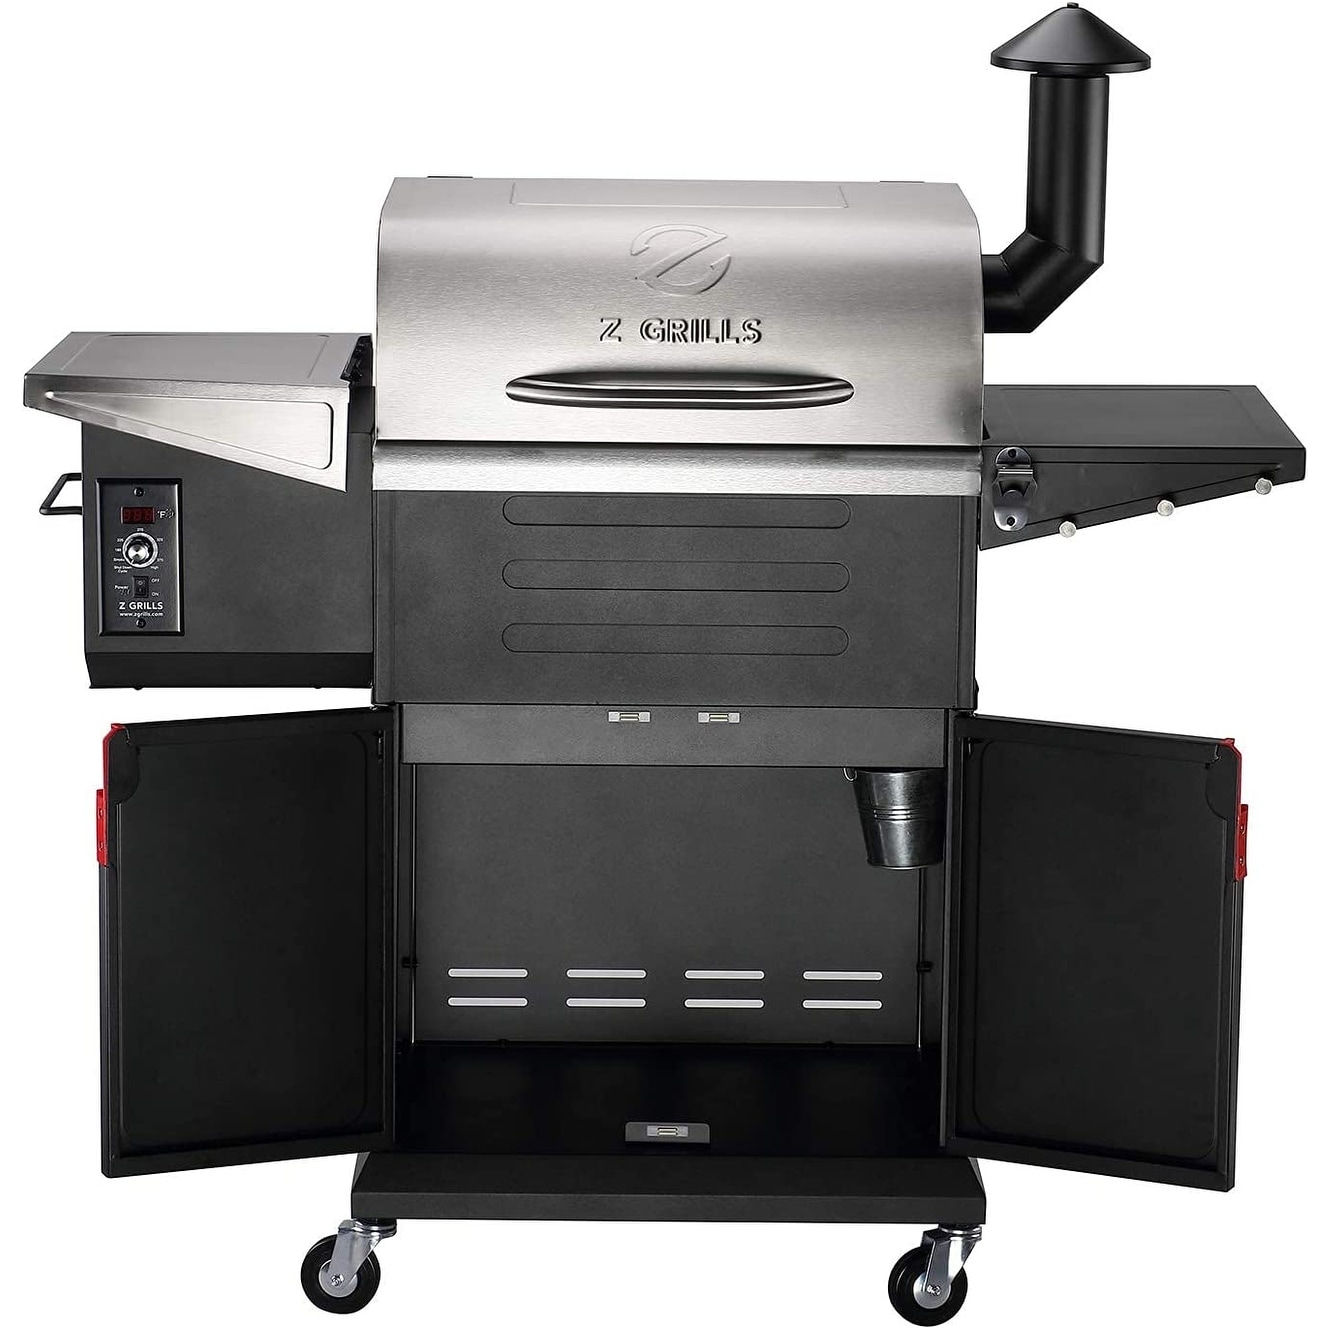 https://ak1.ostkcdn.com/images/products/is/images/direct/546f53d6ed312cf5763c52ce6cfad7203cd31bfd/Z-GRILLS-Grill-%26-Smoker-8-in-1-Grill-Wood-Pellet-Grill-%26-Electric-Smoker-BBQ-Combo-with-Auto-Temperature-Control-ZPG-600D3E.jpg